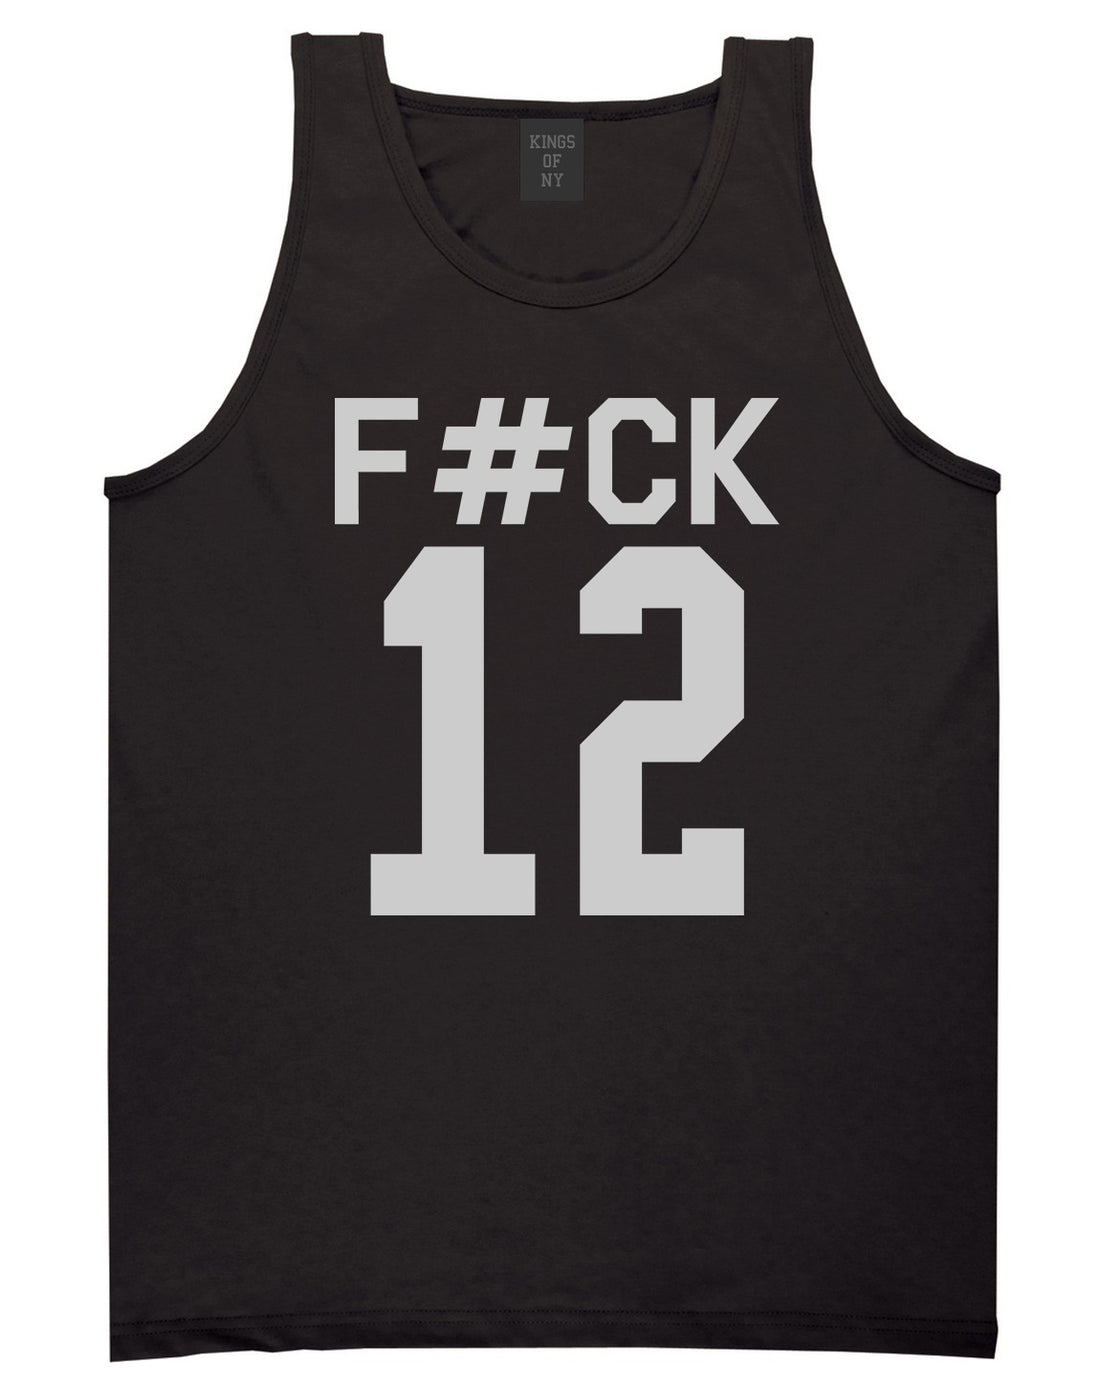 Fck 12 Police Brutality Mens Tank Top Shirt Black by Kings Of NY